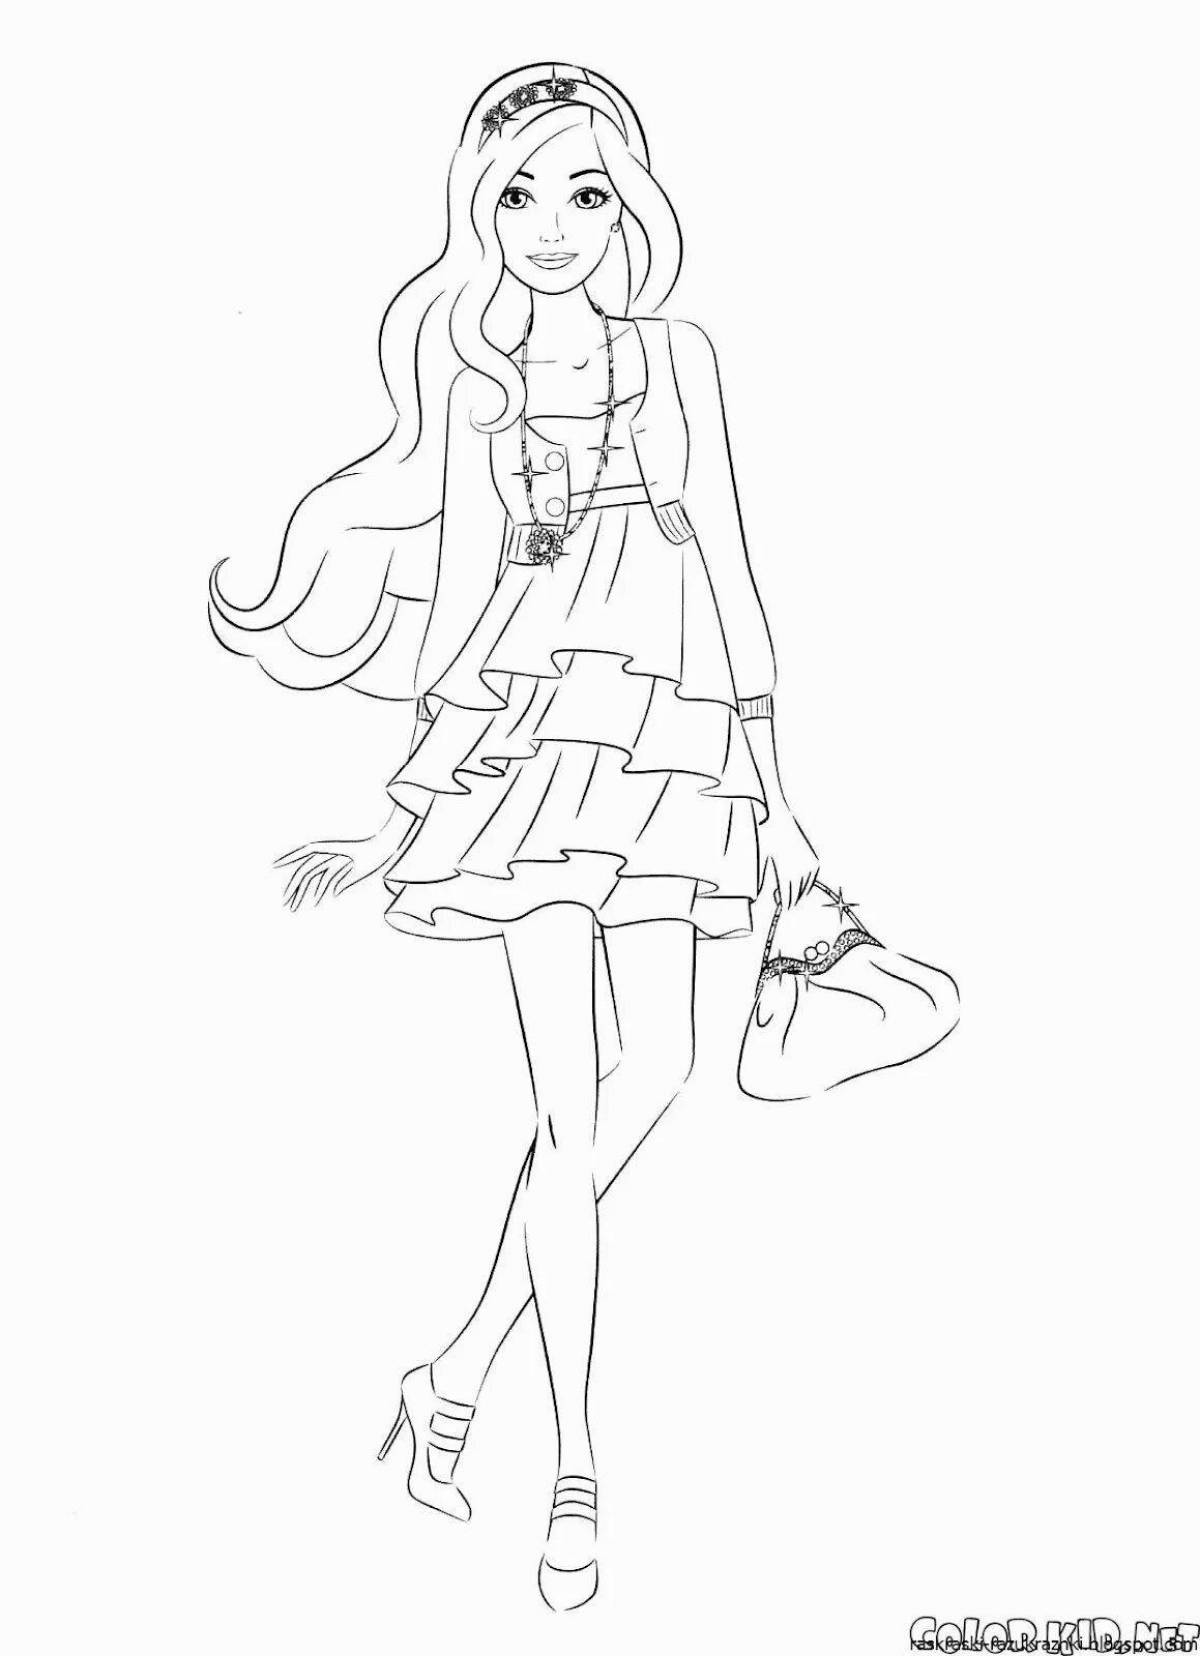 Live coloring girl in a long dress